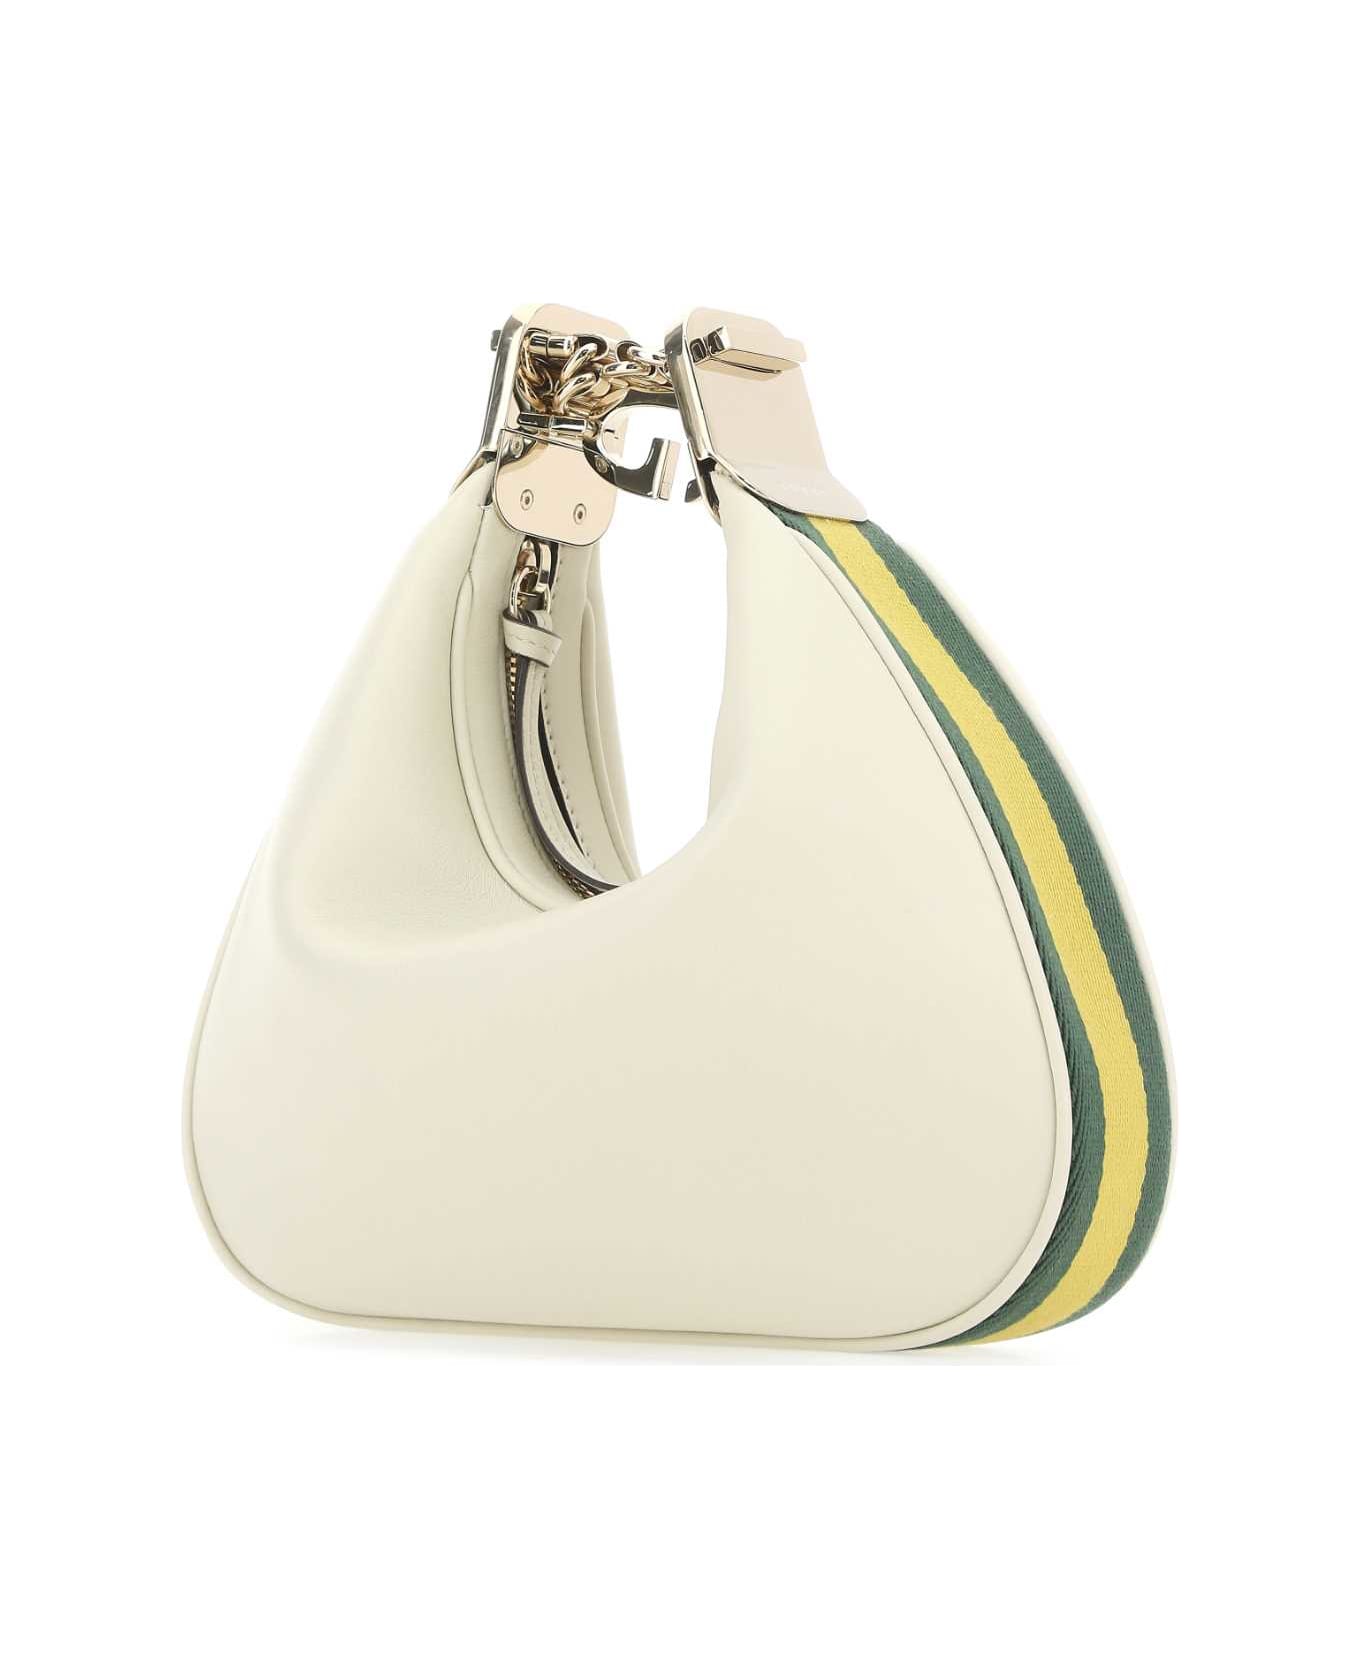 Gucci Ivory Leather Small Gucci Attache Shoulder Bag - 9109 トートバッグ